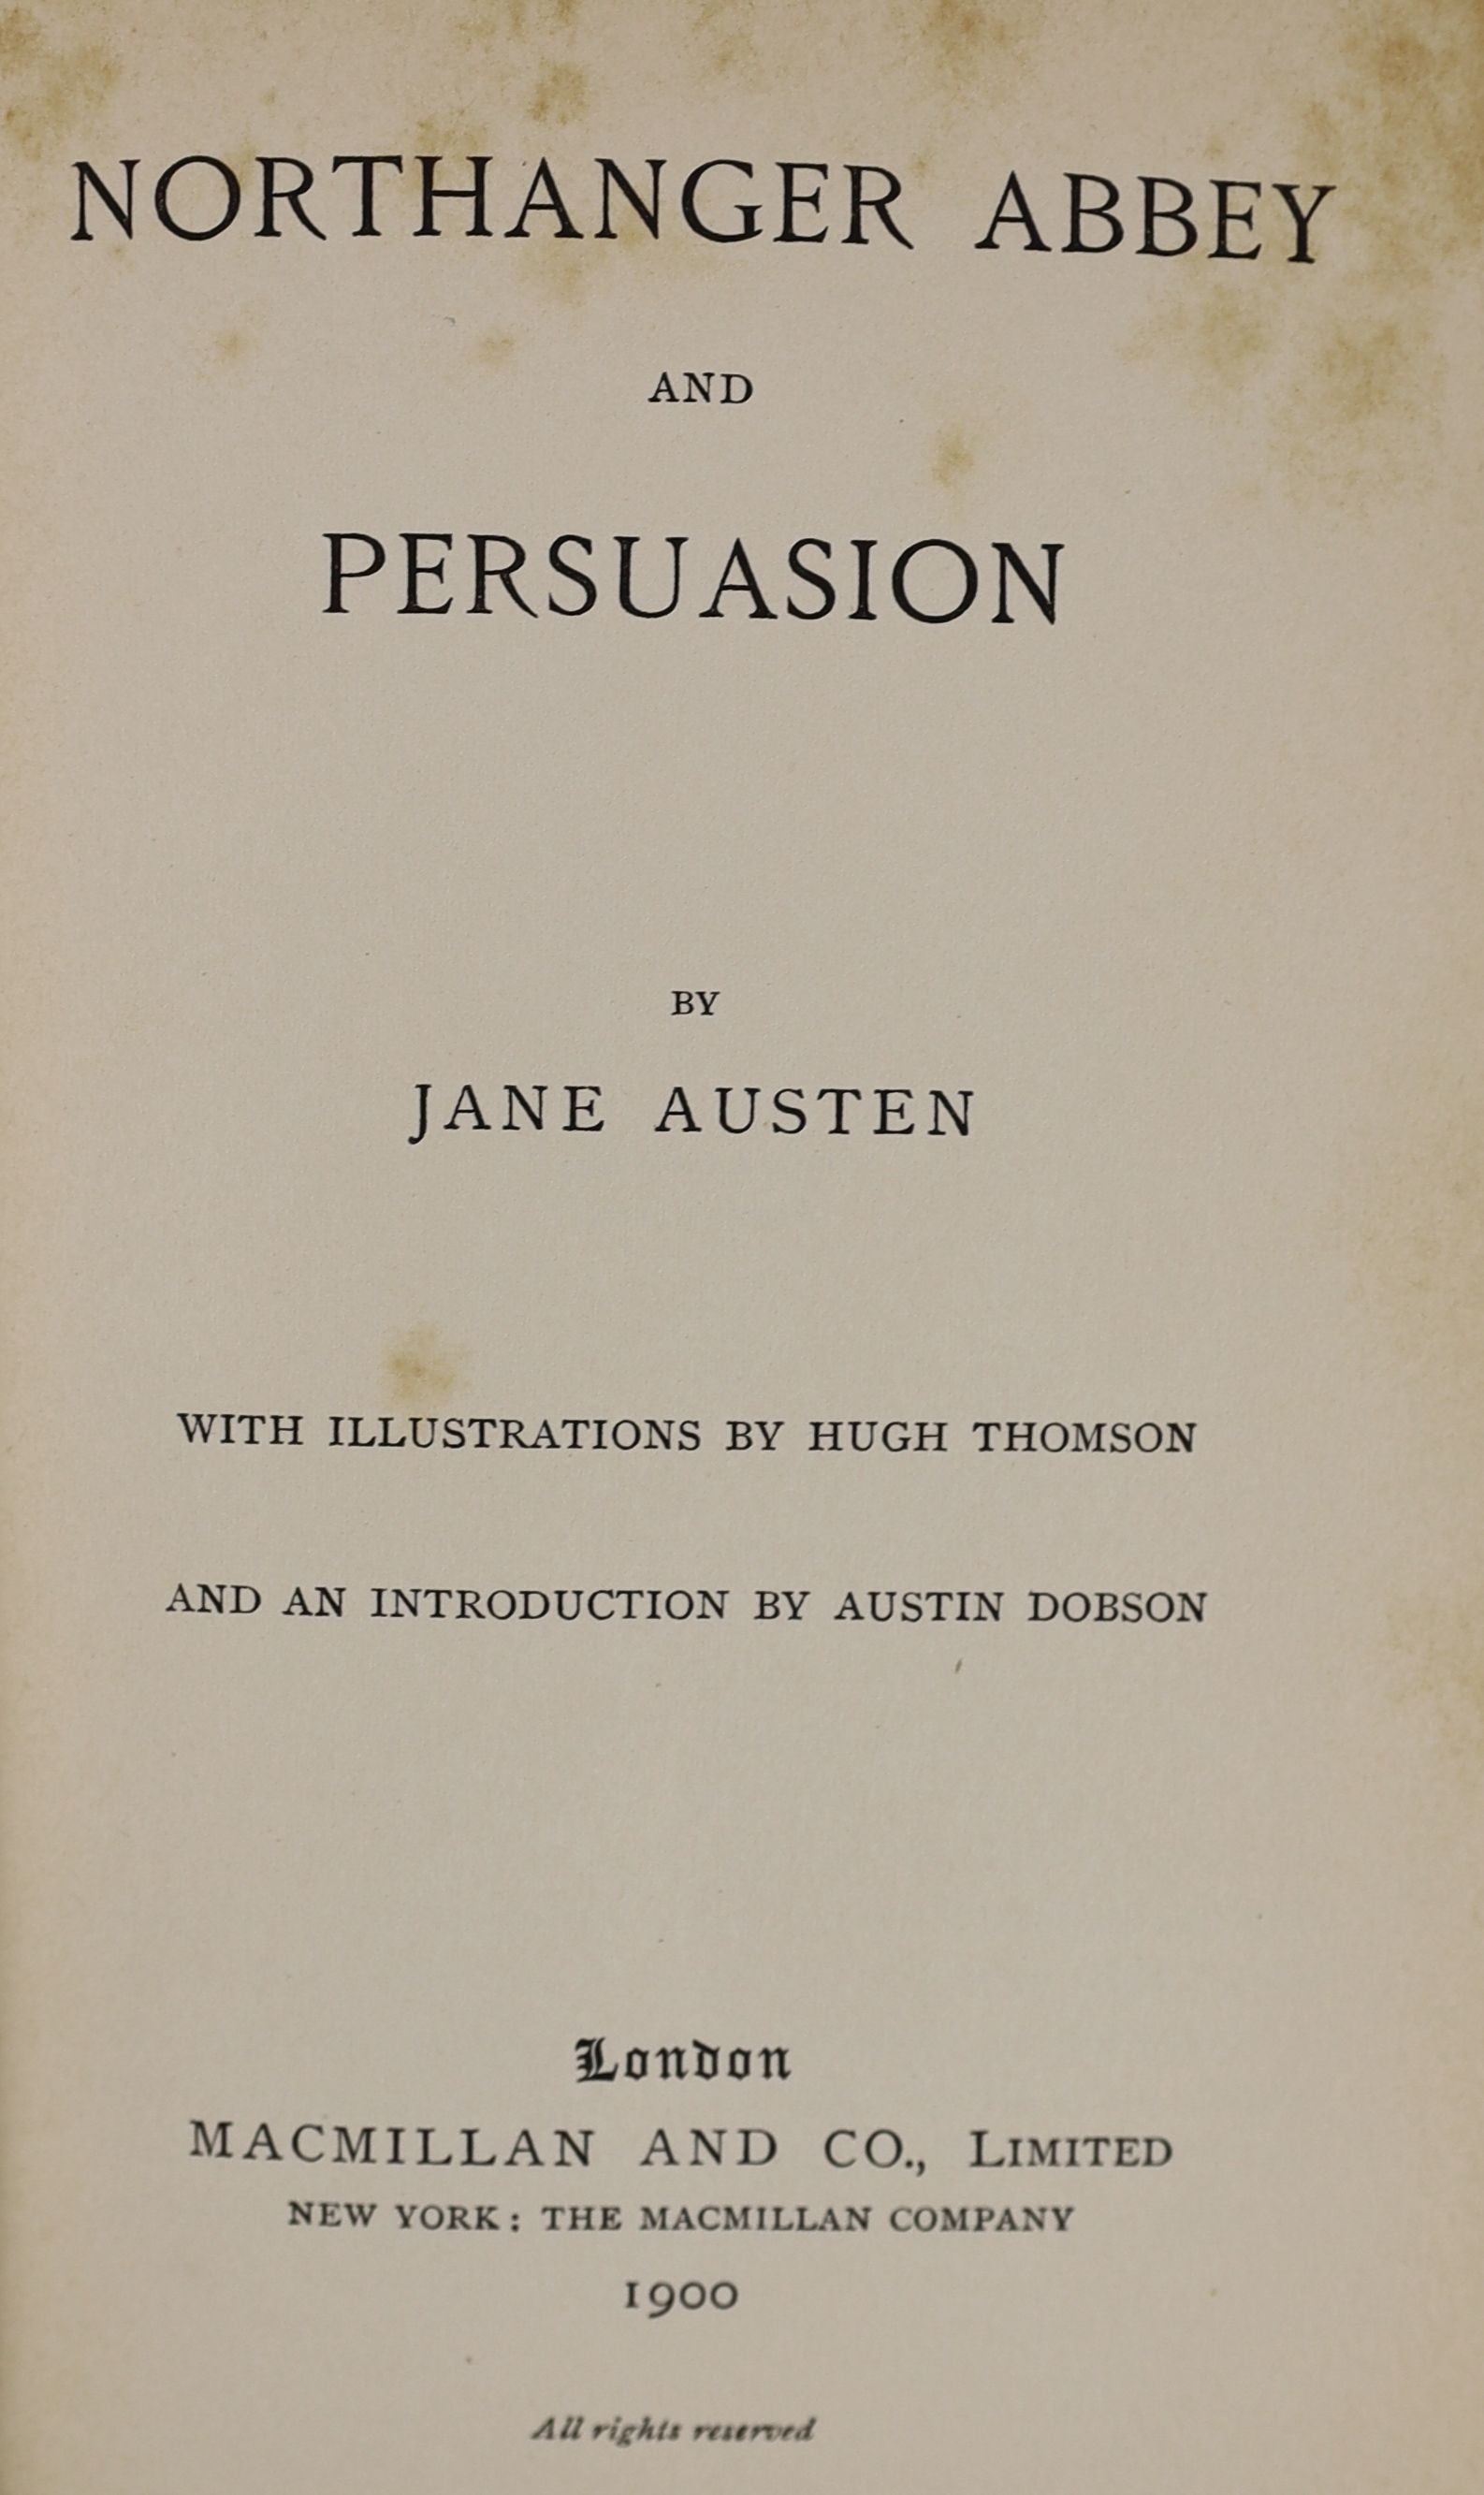 Austen, Jane - Macmillan's Illustrated Standard Novels, comprising: Sense and Sensibility; Emma; Mansfield Park; Northanger Abbey and Persuasion; i.e. 4 vols (ex 5 -without Pride and Prejudice); publisher's introductions